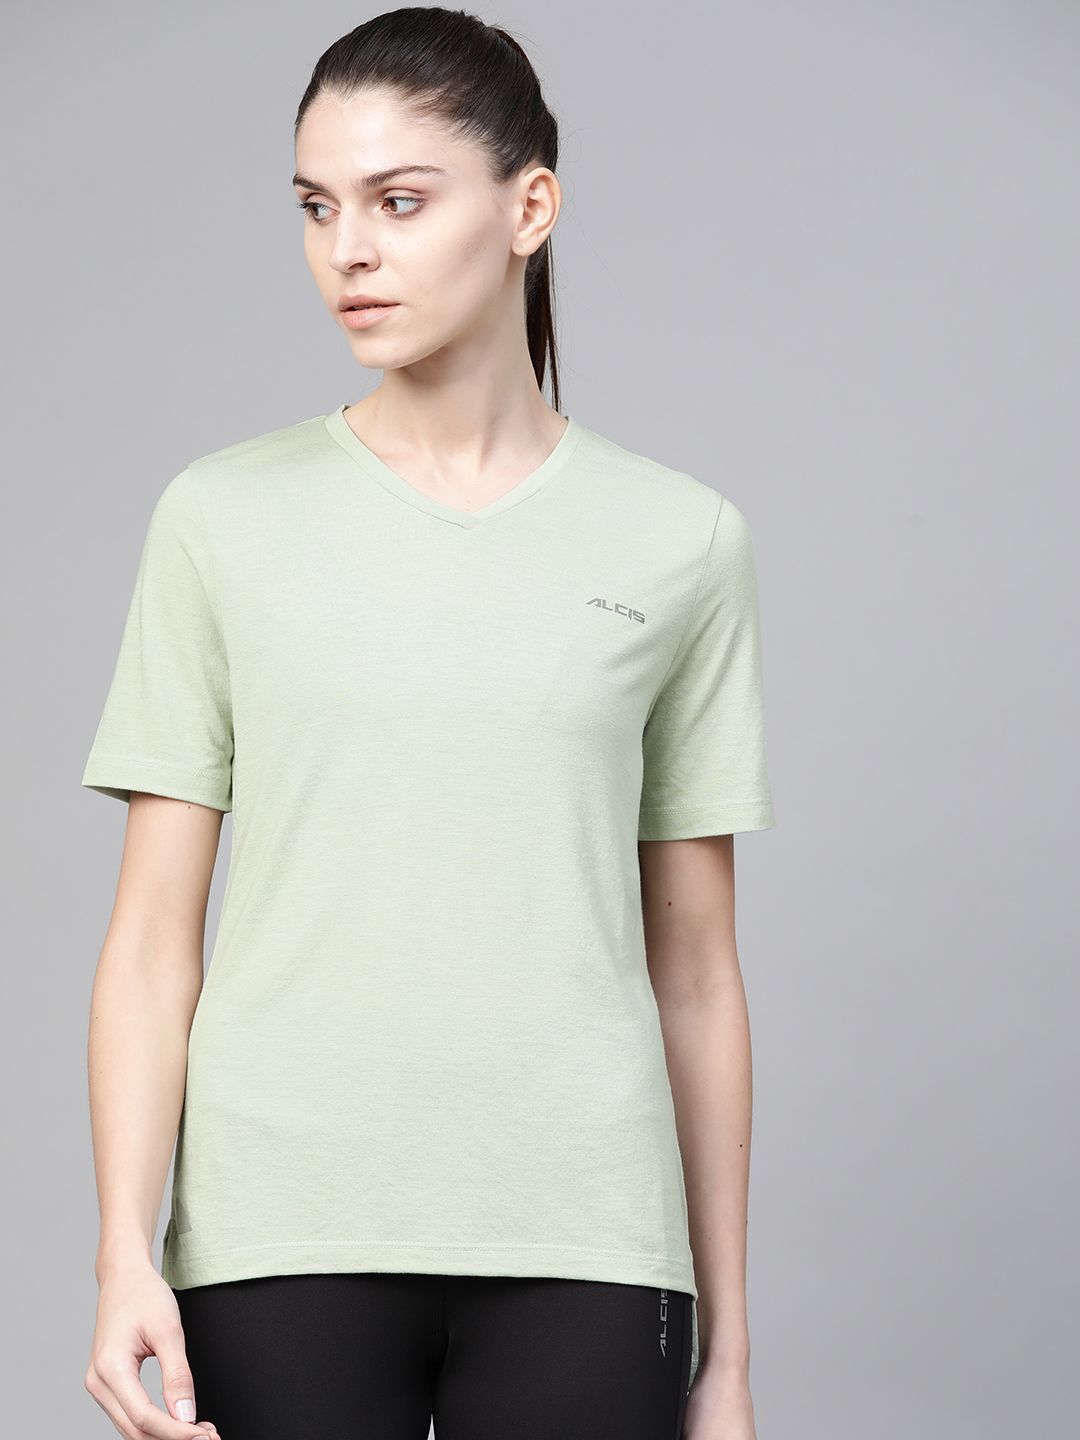 Alcis Women Green Solid V-Neck High-Low Training T-shirt Price in India